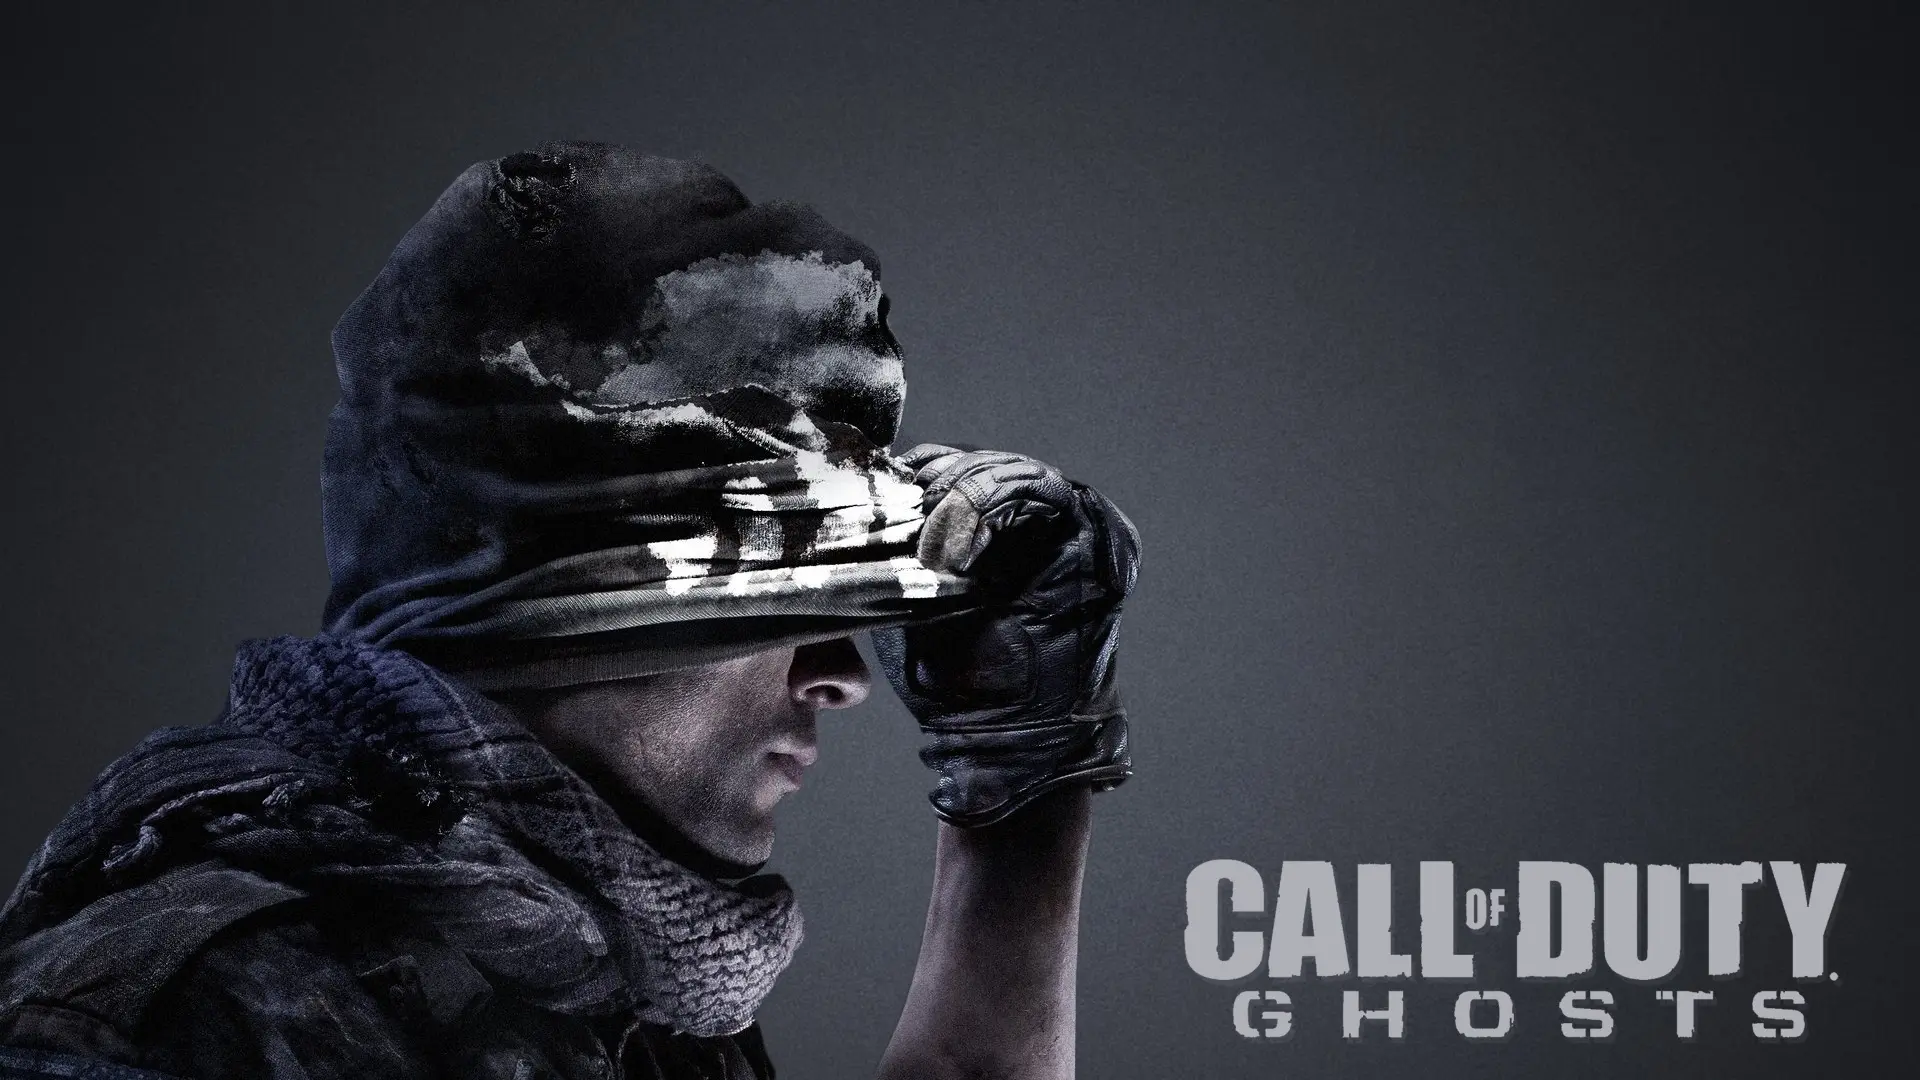 Game Call of Duty Ghosts wallpaper 1 | Background Image